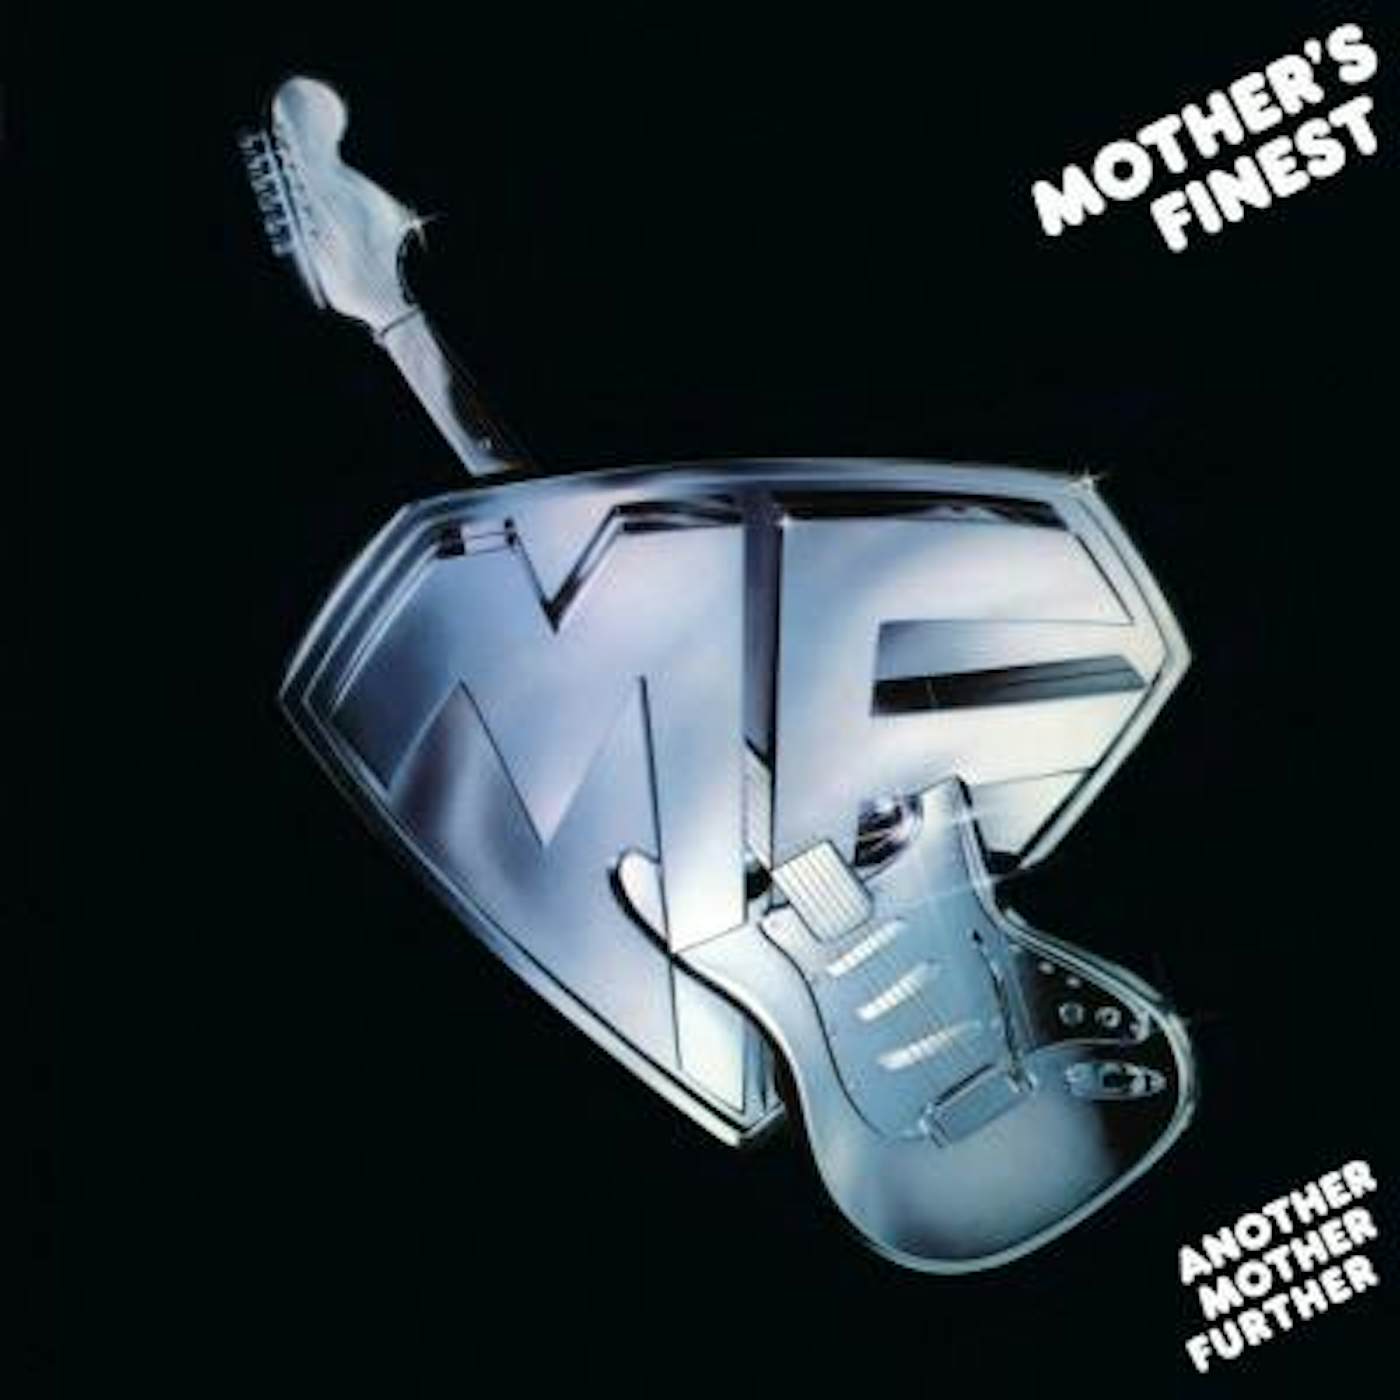 Mother's Finest ANOTHER MOTHER FURTHER (24BIT REMASTERED) CD